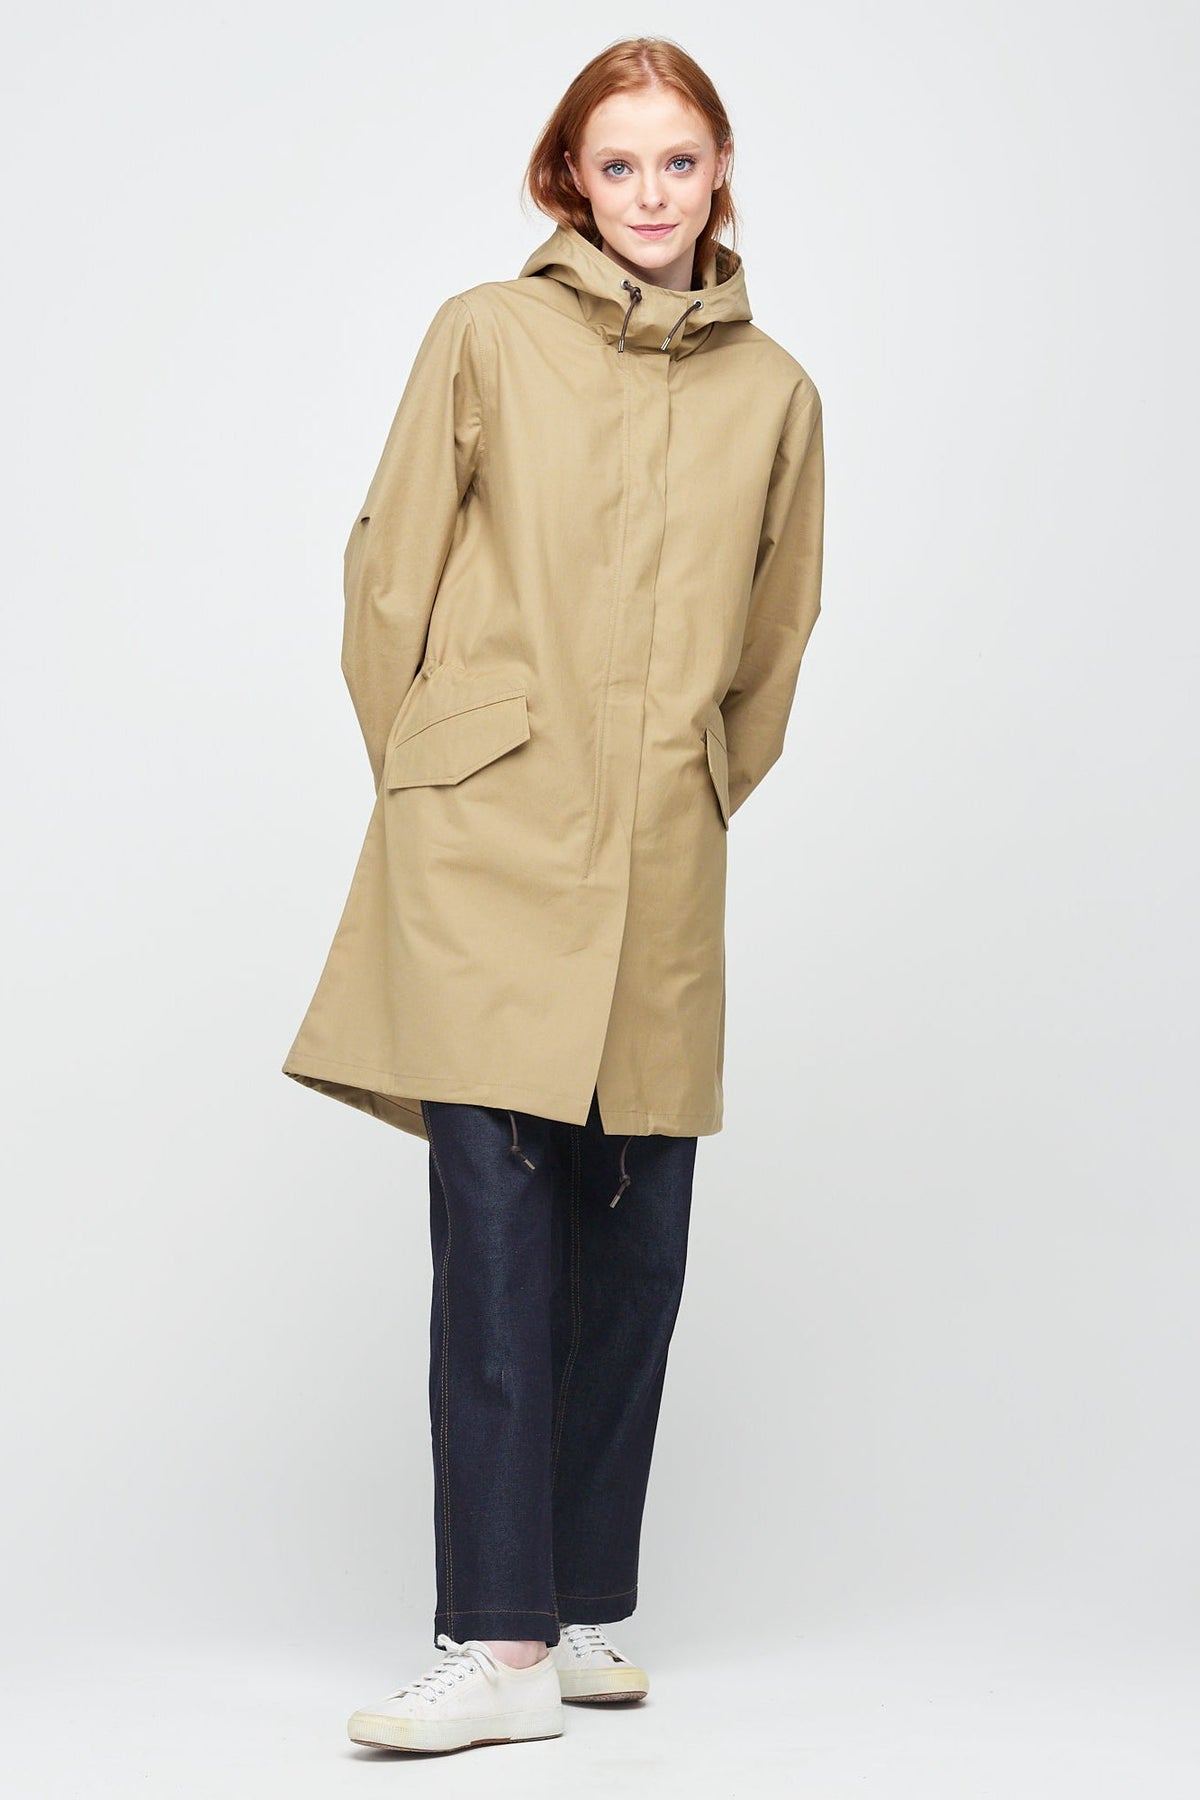 
            A young, white female model with ginger hair wearing long stone coloured parka fully zipped up. The parka is styled with a indigo jeans and a white trainer.